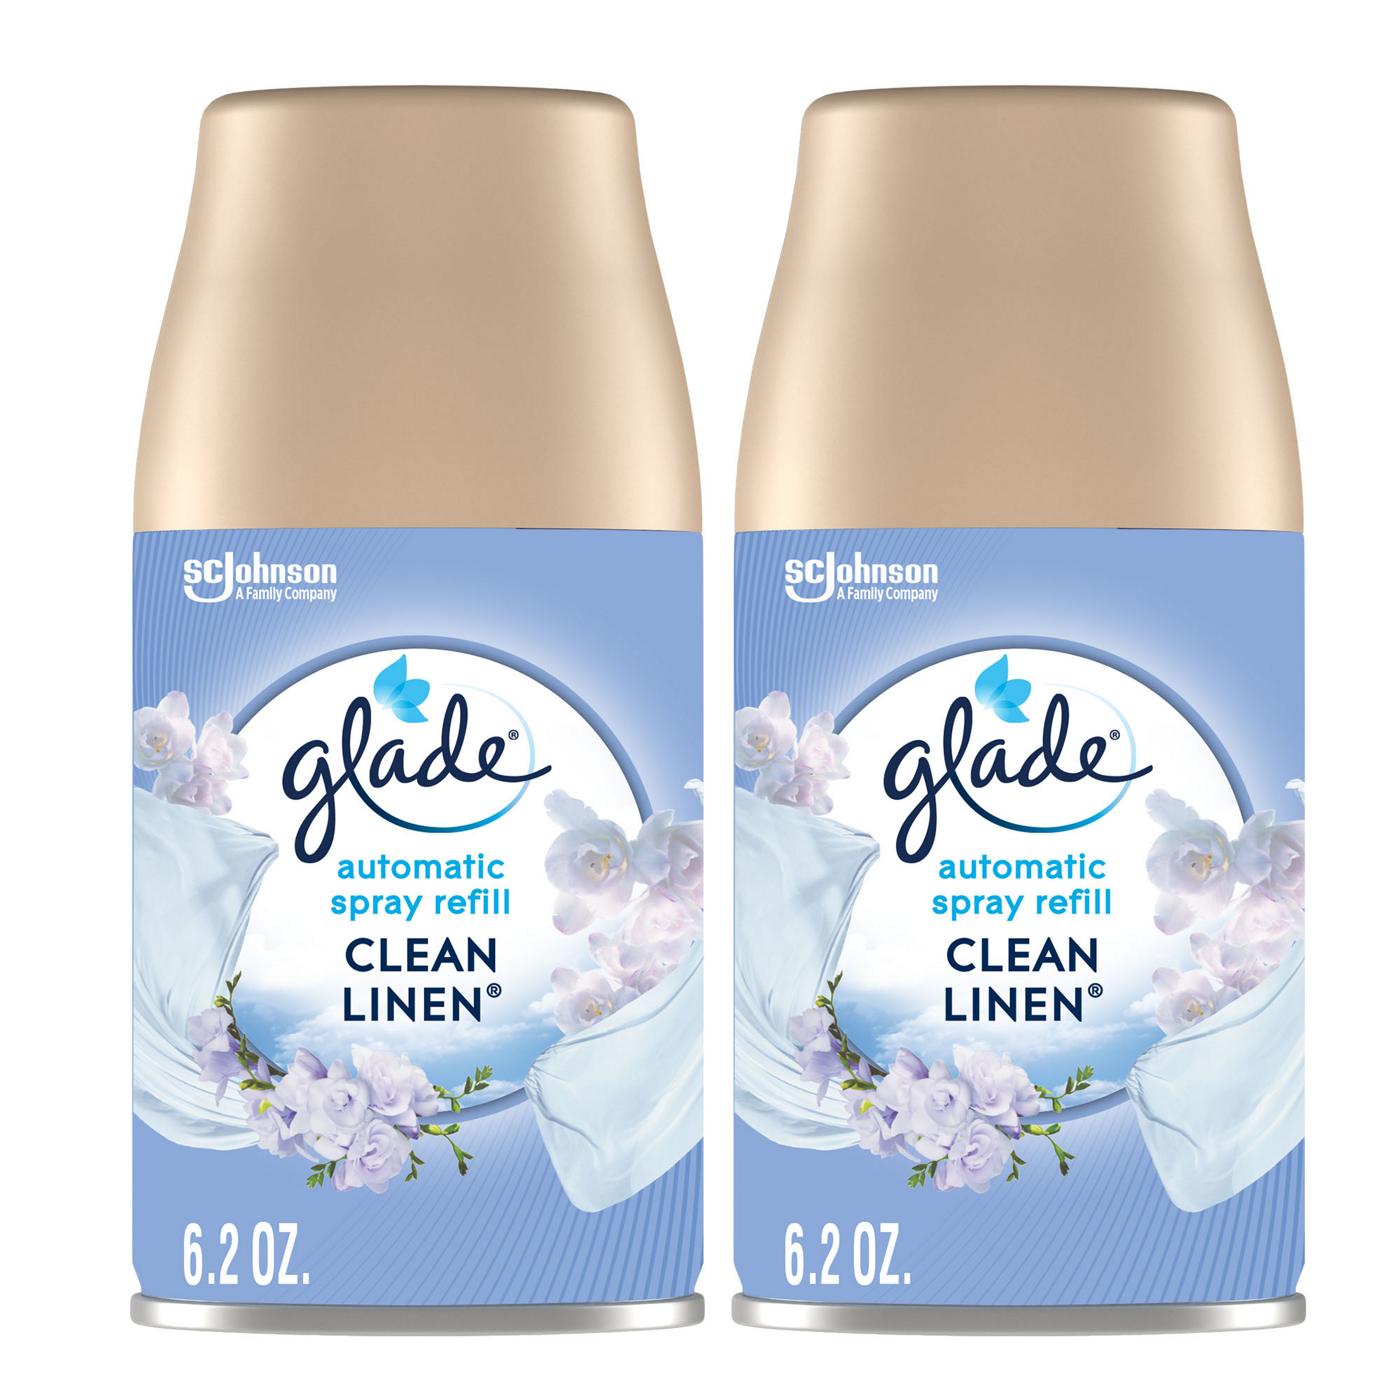 Glade Automatic Spray Refills, Value Pack - Clean Linen; image 1 of 3